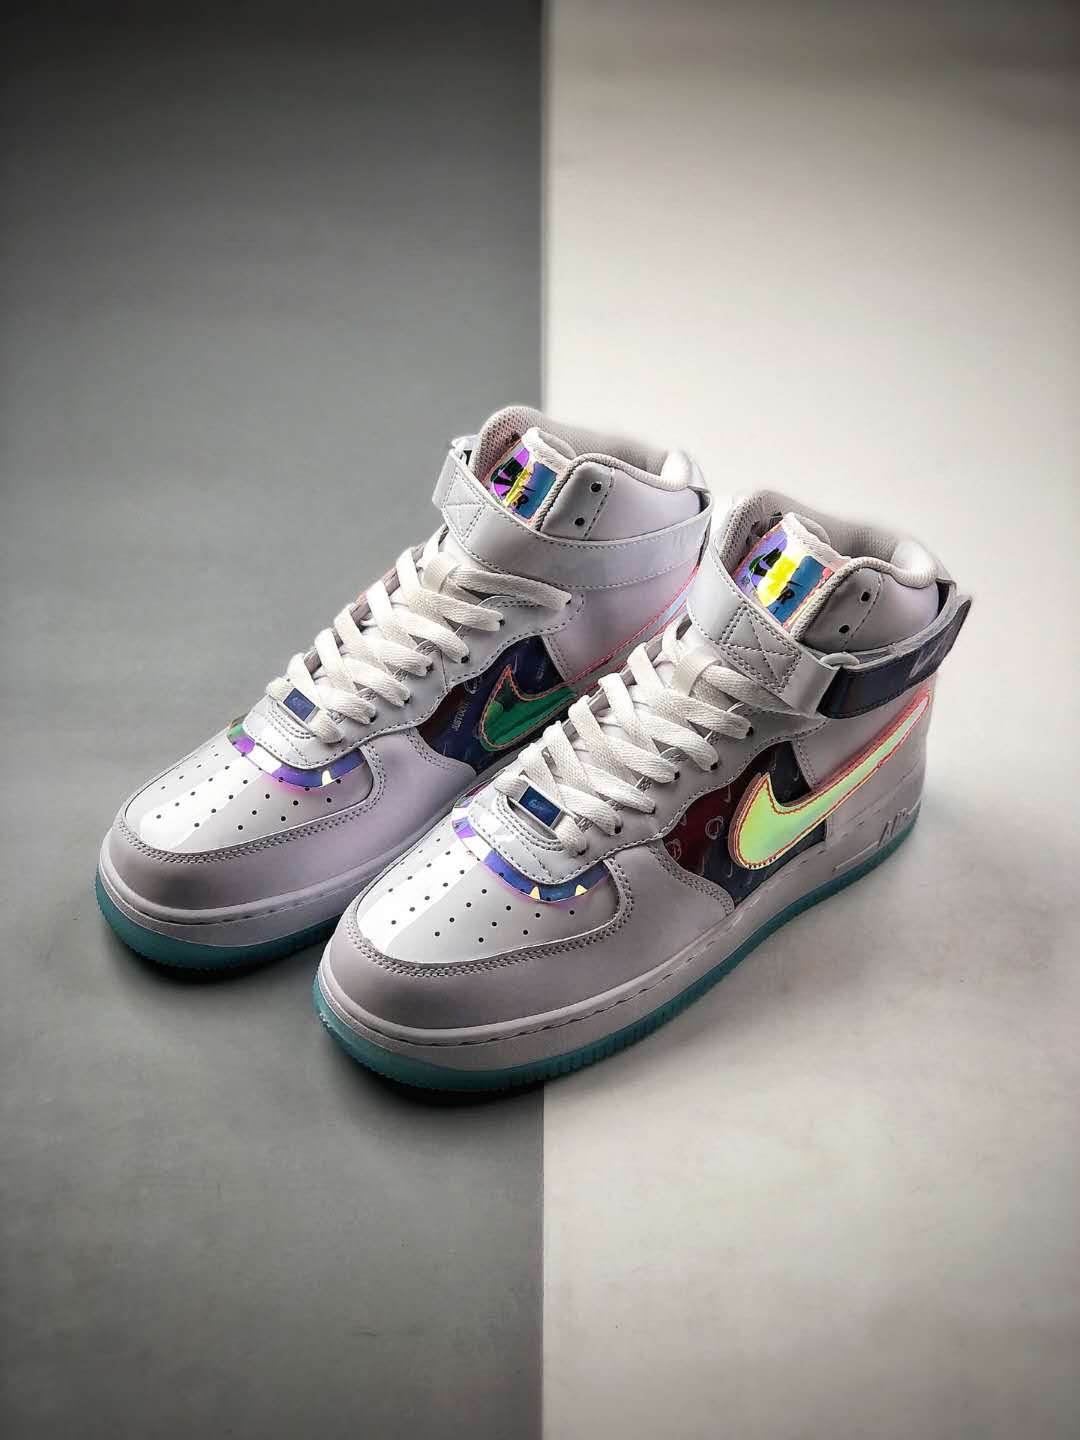 Nike Air Force 1 High LX 'Have A Good Game' DC2111-191 - Premium Sneakers for Performance and Style